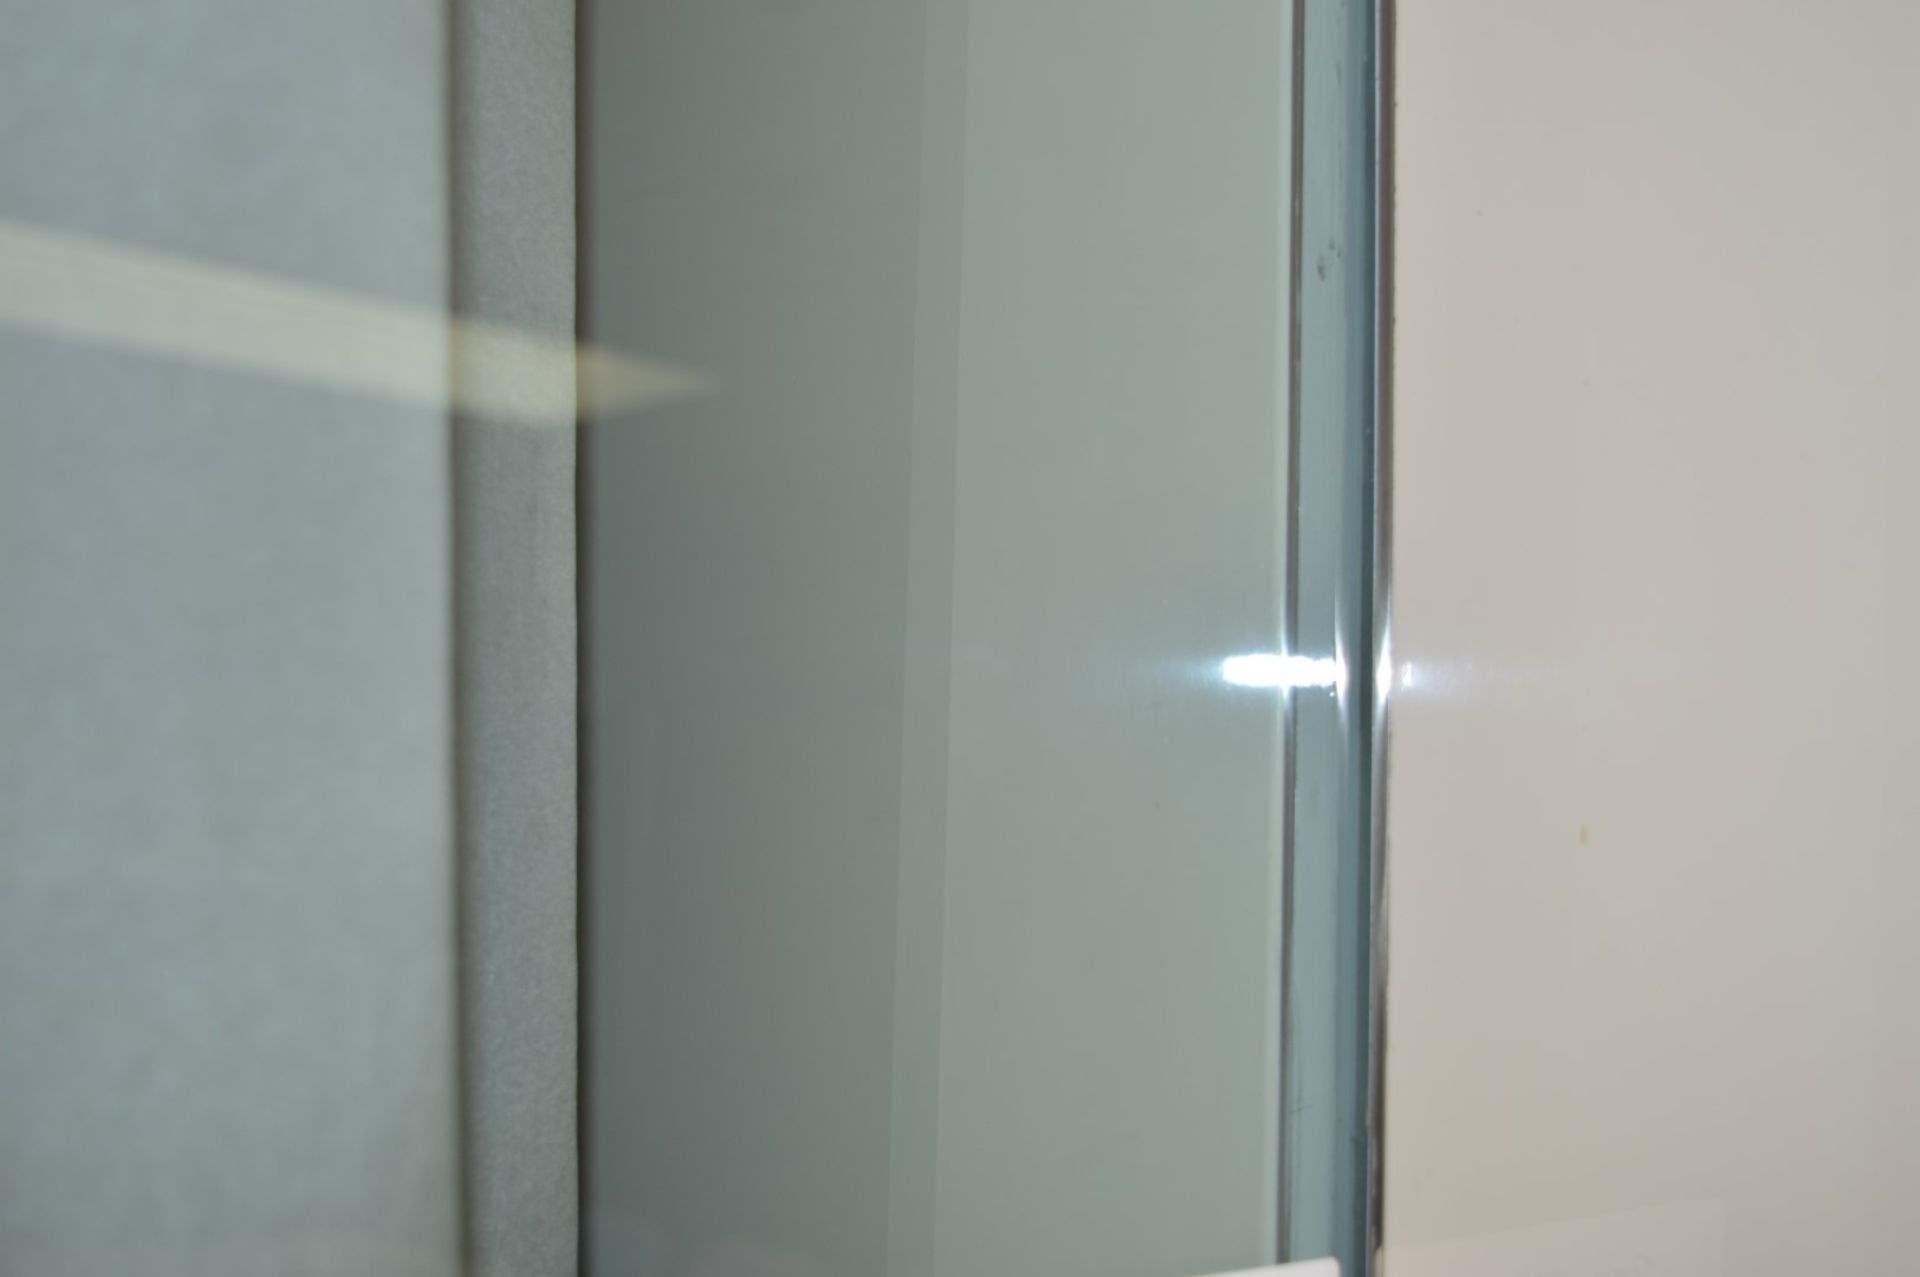 1 x Divider Glass Panel - Ref 75 - More Pictures, Dimensions & Information to Follow - CL230 - - Image 2 of 2